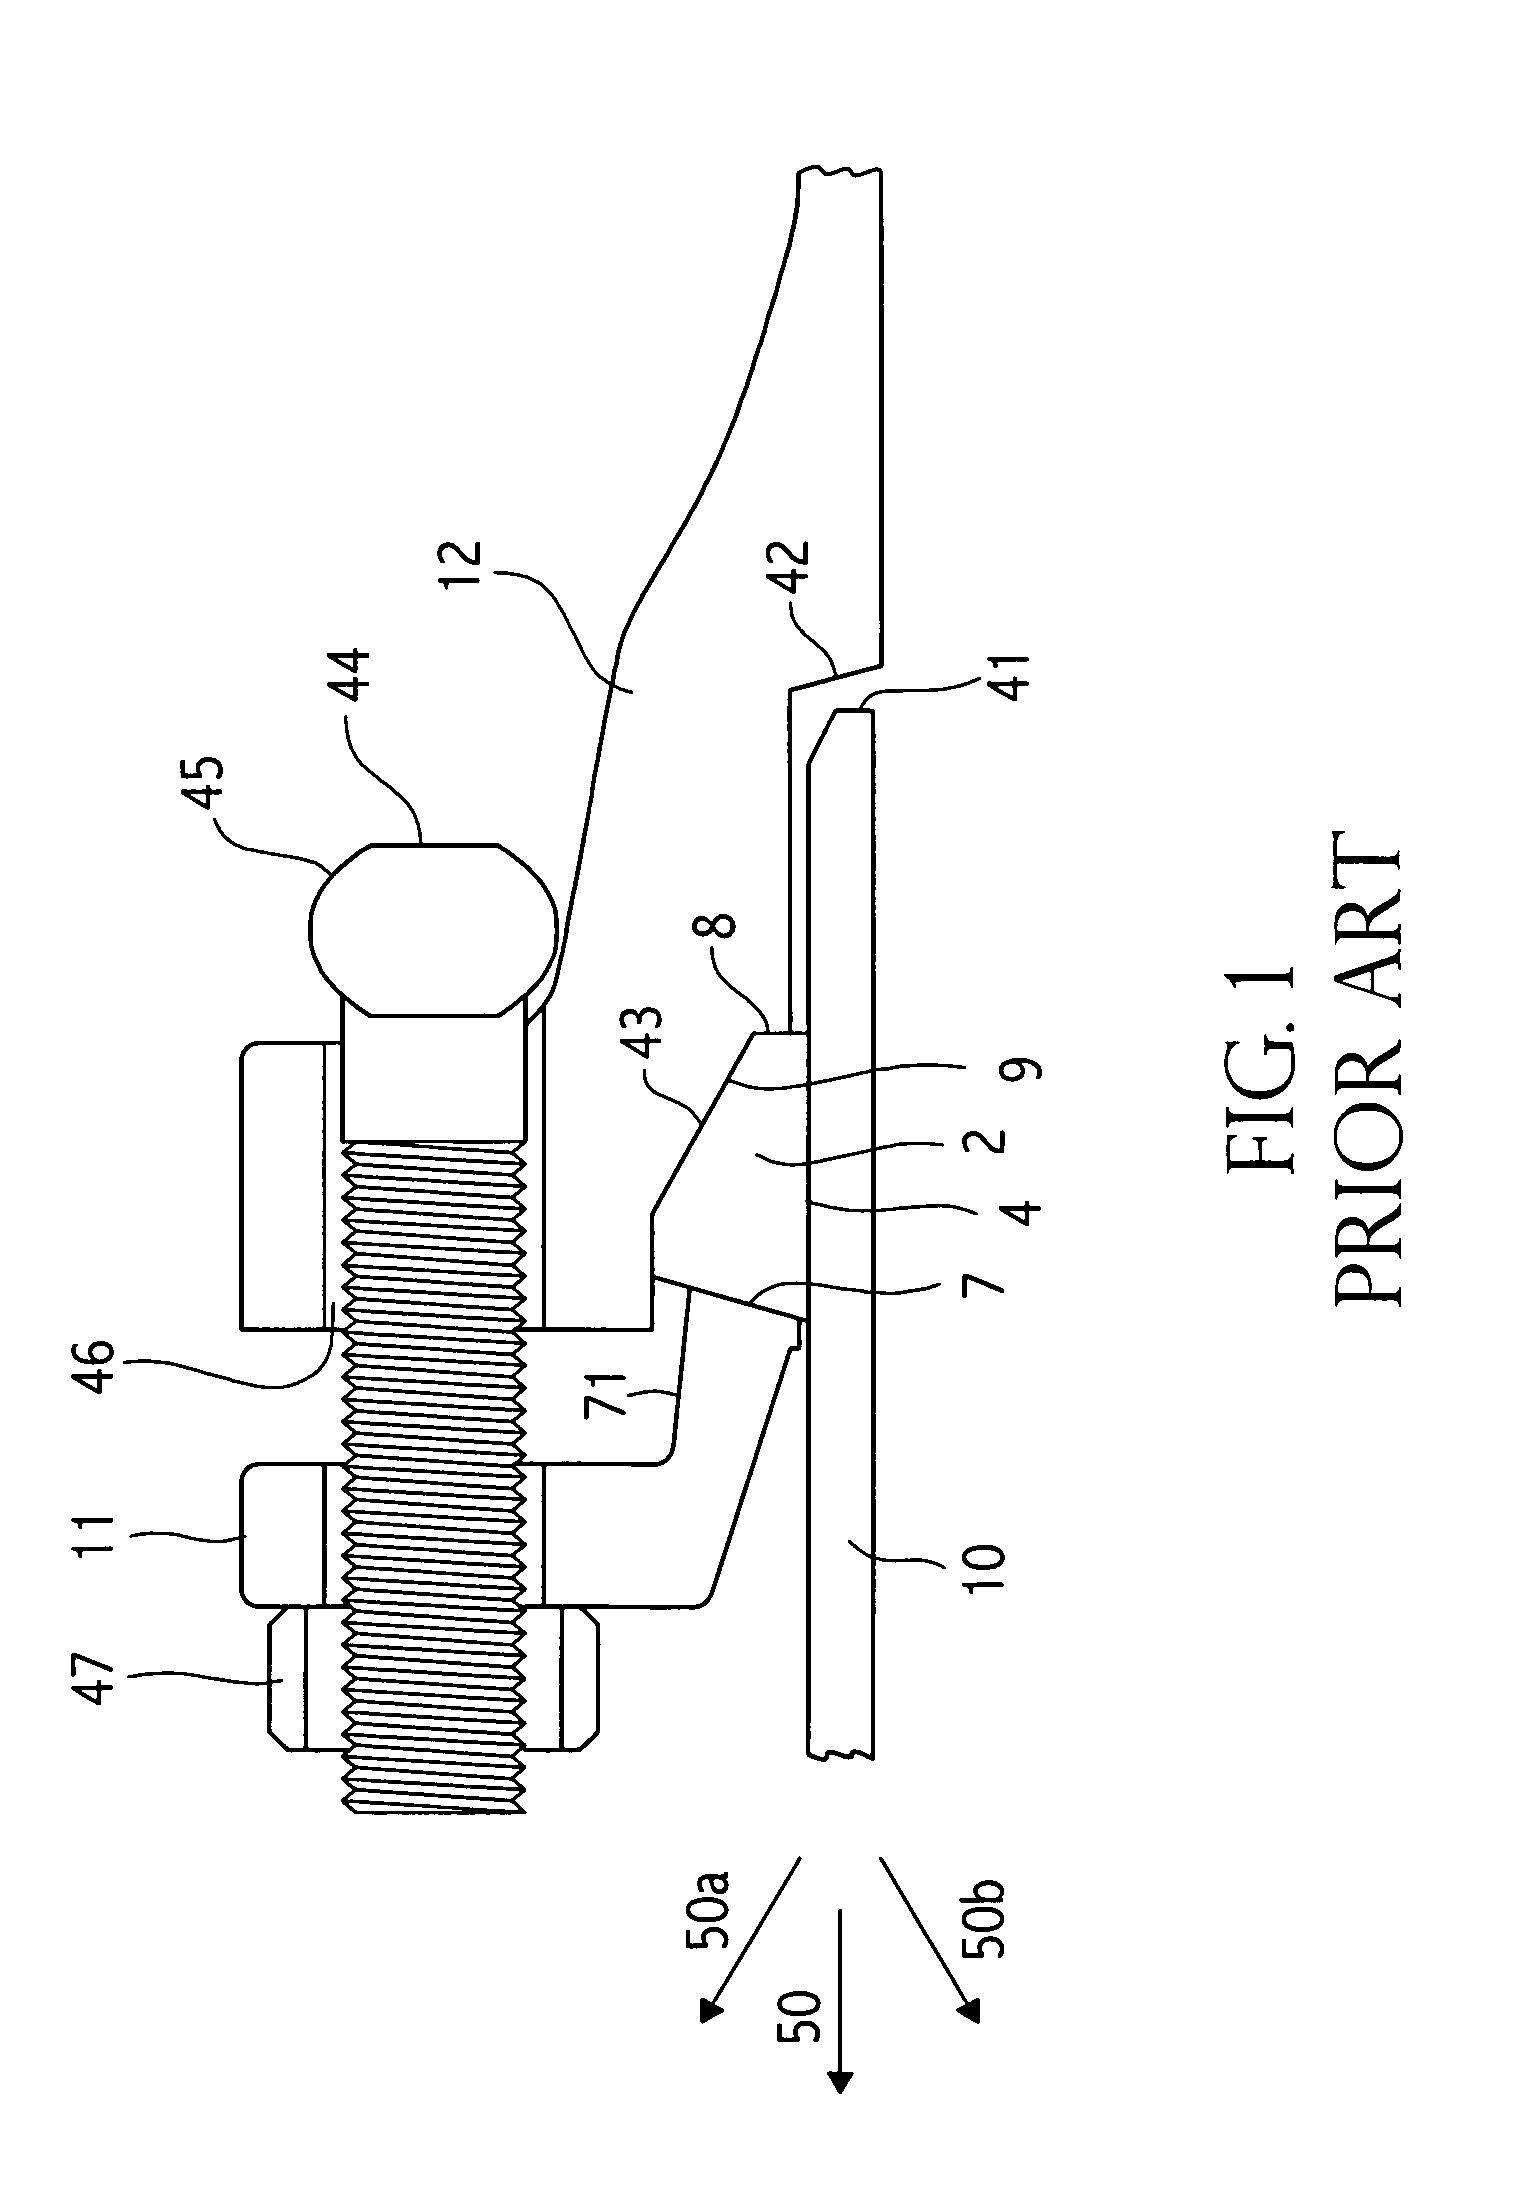 Restraining gasket for mechanical joints of pipes